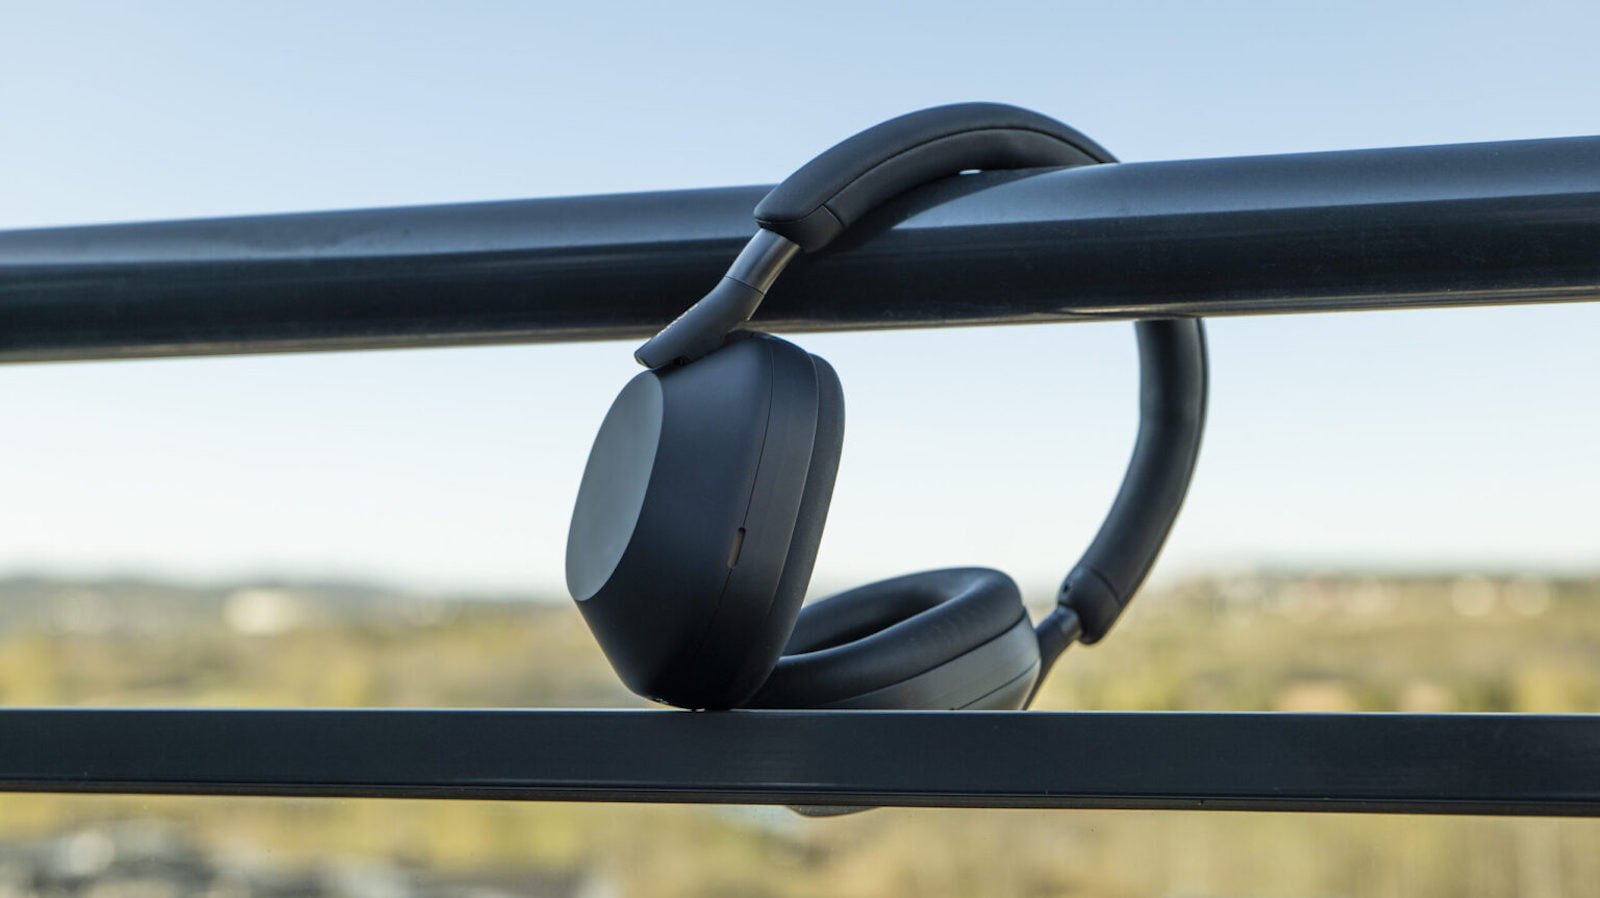 Sony WH-1000XM5 wireless headphones include 8 microphones and an Auto NC Optimizer